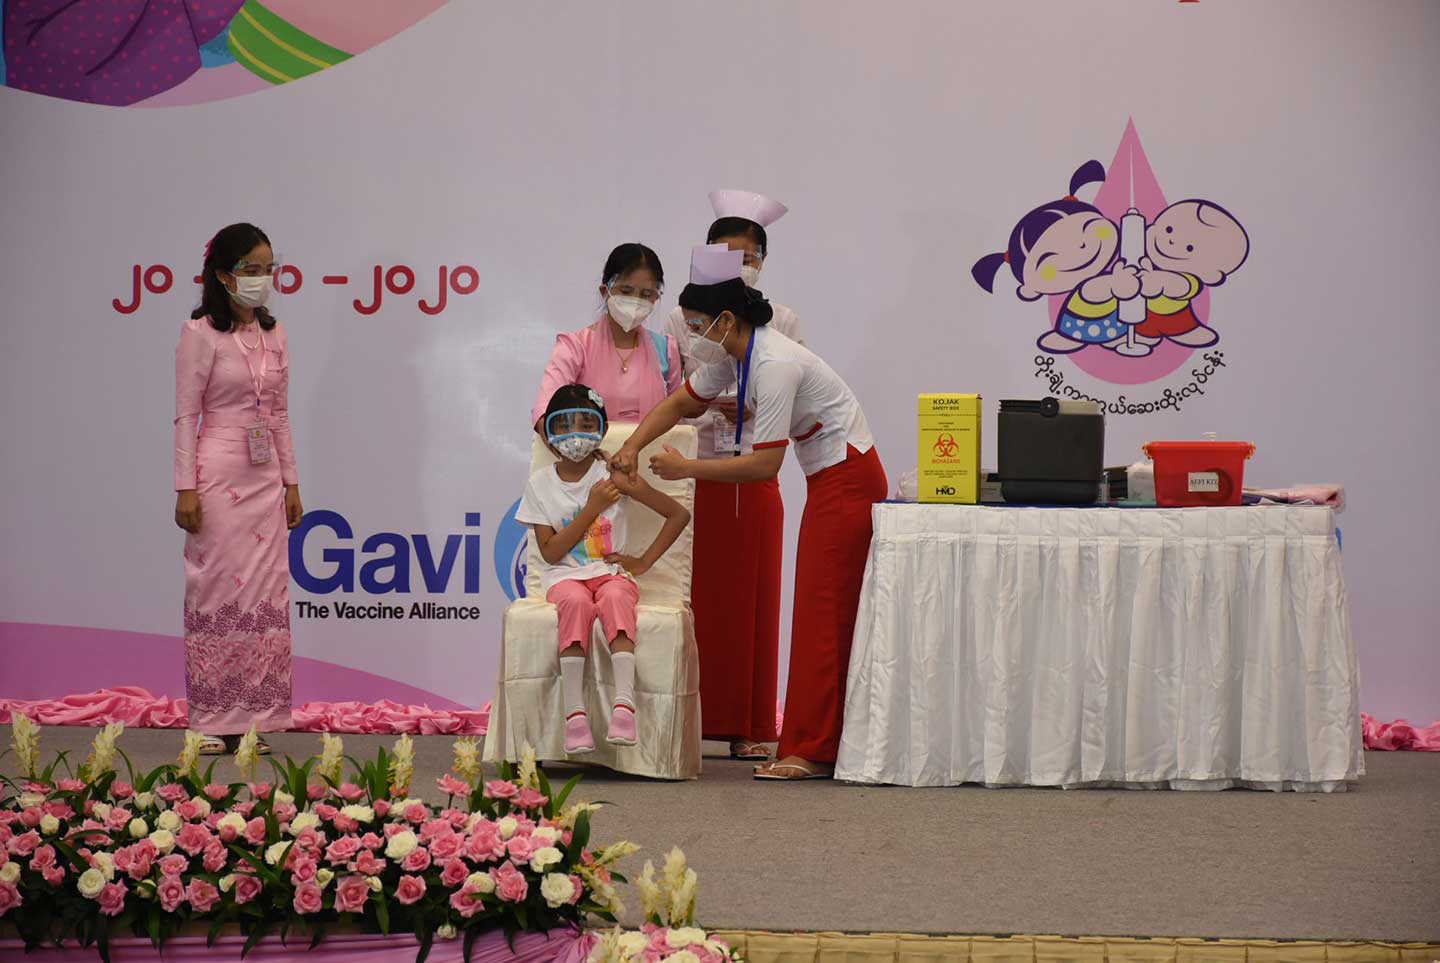 The vaccines, provided with financial support from Gavi, the Vaccine Alliance, will aim to reach all girls aged 9-10 with their first of two doses administered twelve months apart. Gavi/2020